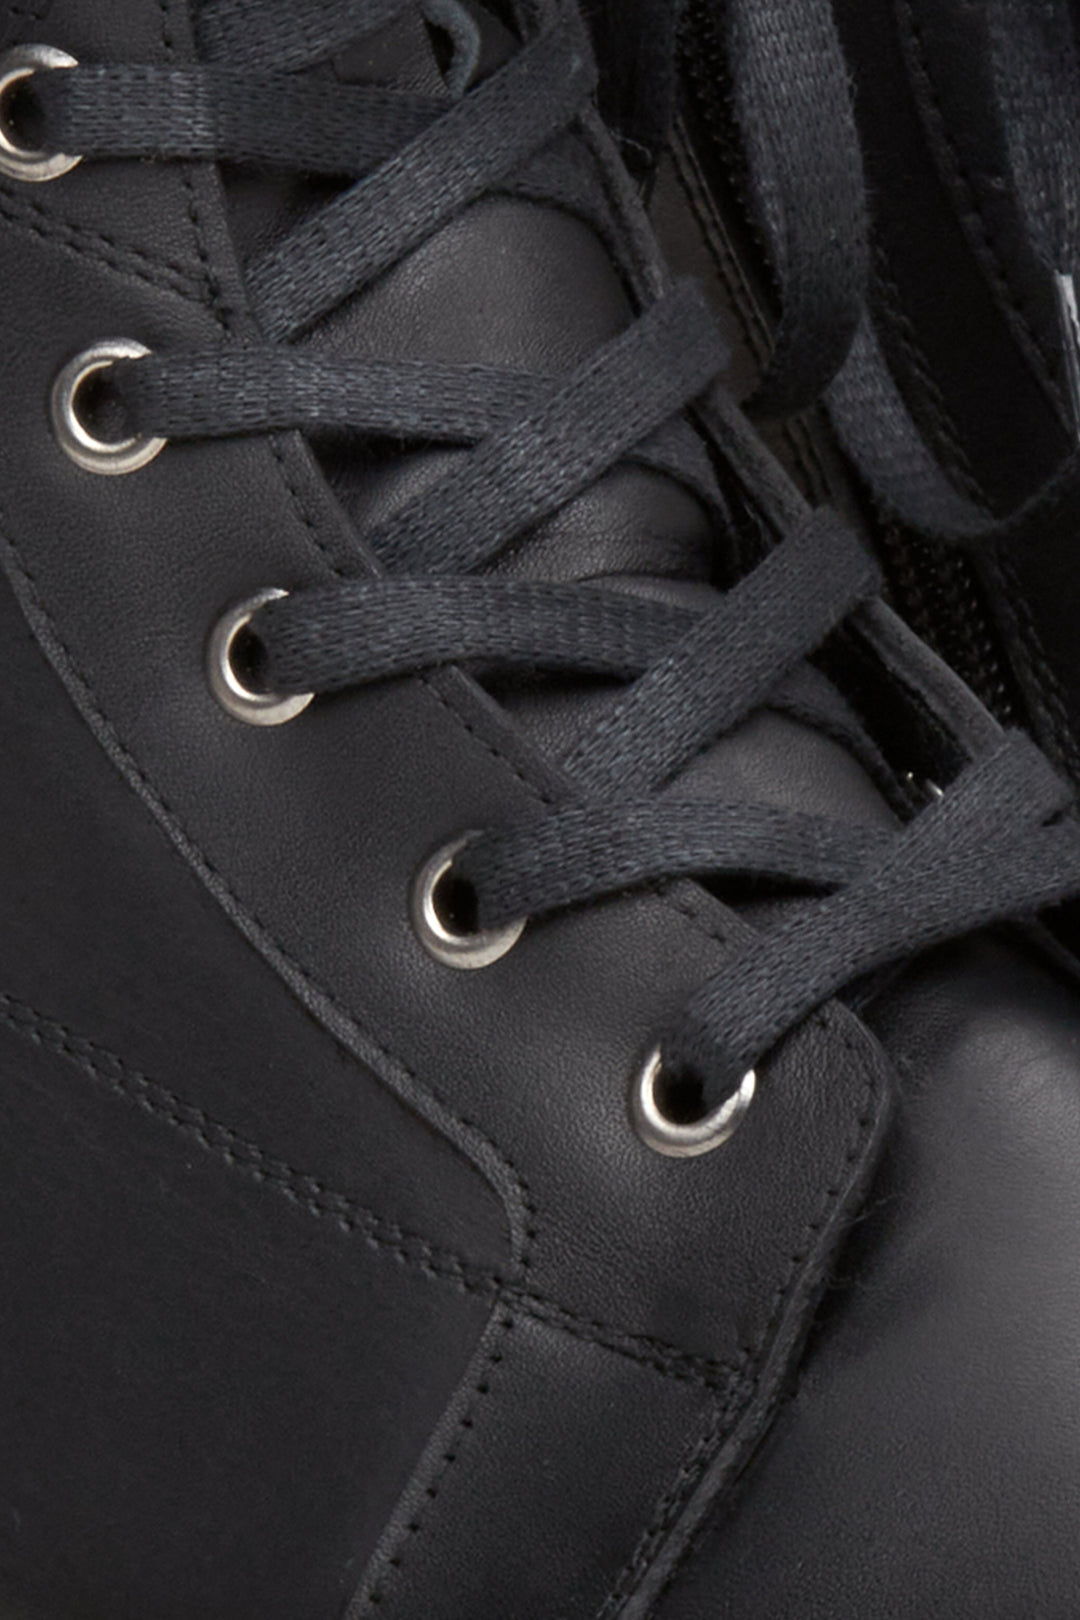 Women's black leather  boots by Estro - close-up on the decorative lacing.